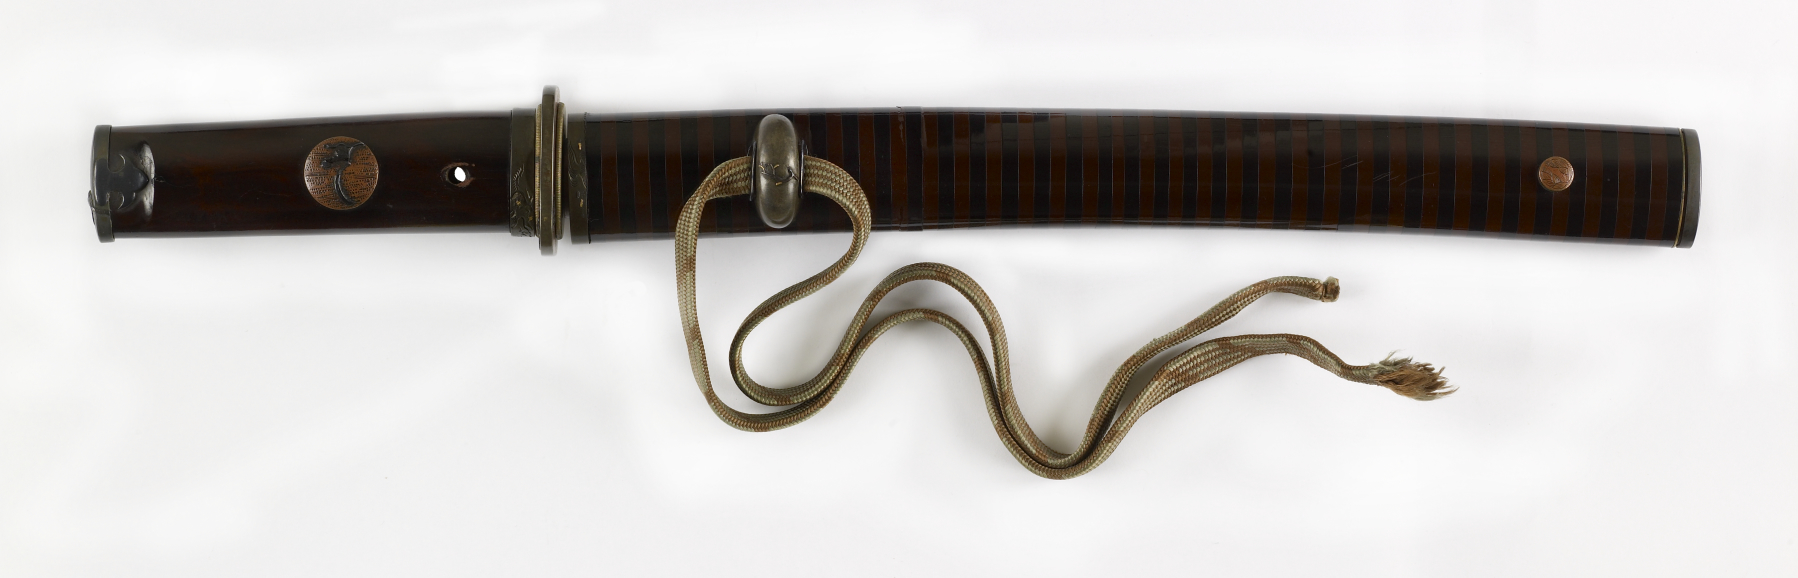 Image for Dagger (yari) with brown lacquer saya with dark brown bands (includes 51.1251.1-51.1251.2)